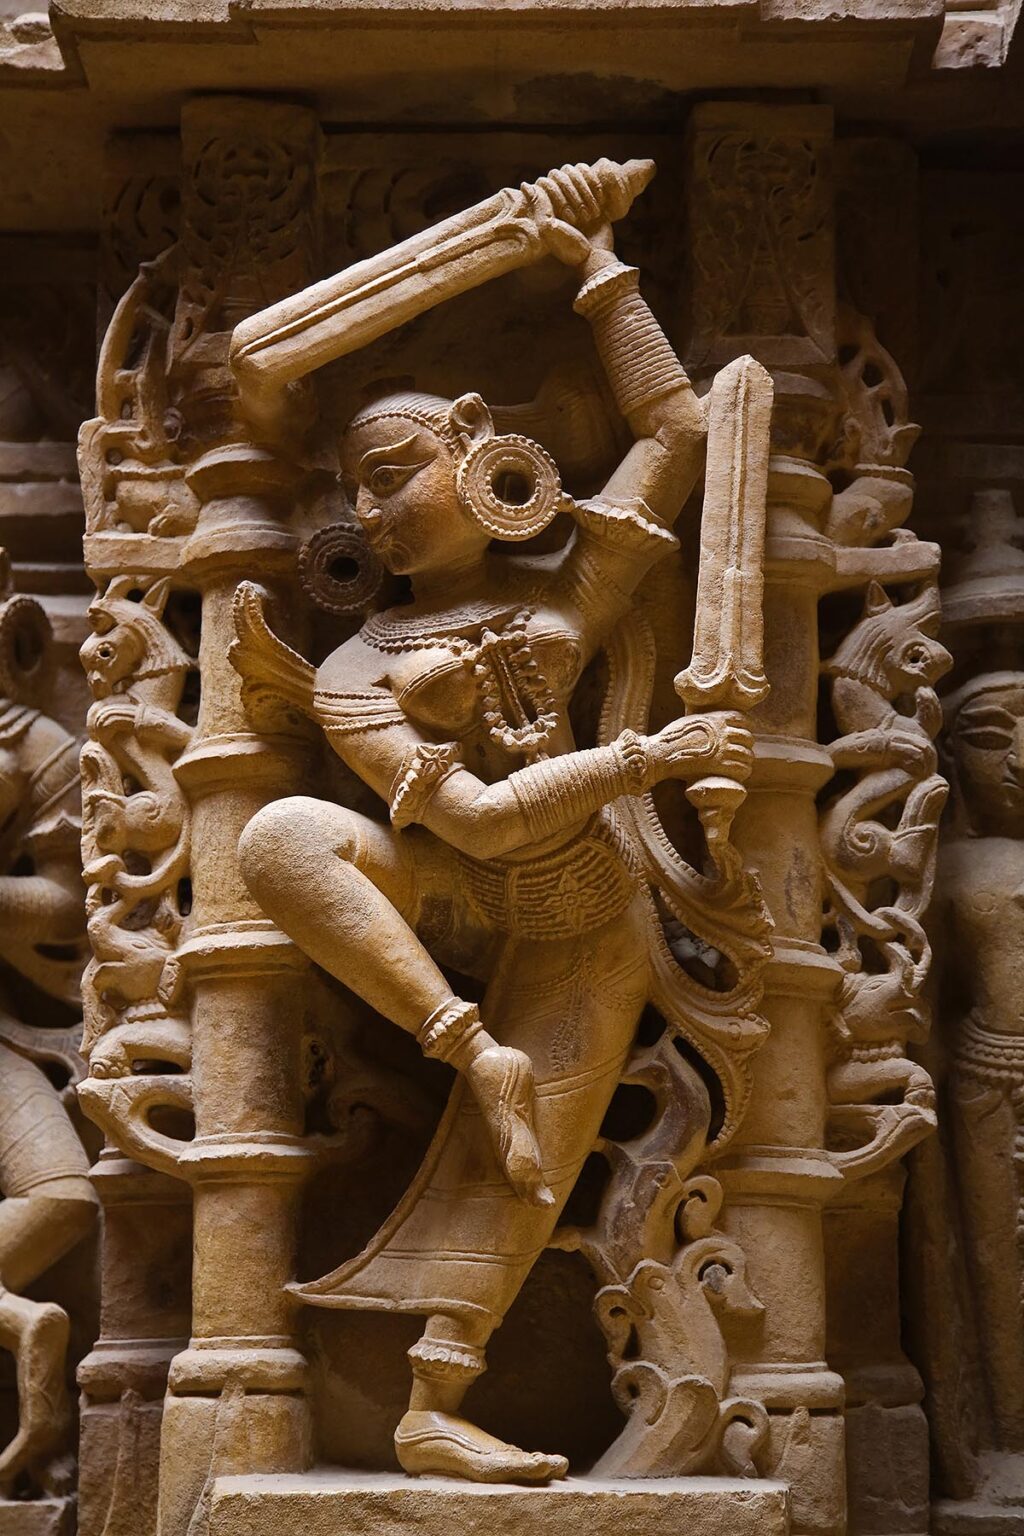 HAND CARVED SANDSTONE DIVA with SWORDS in an ancient JAIN TEMPLE inside JAISALMER FORT - RAJASTHAN, INDIA